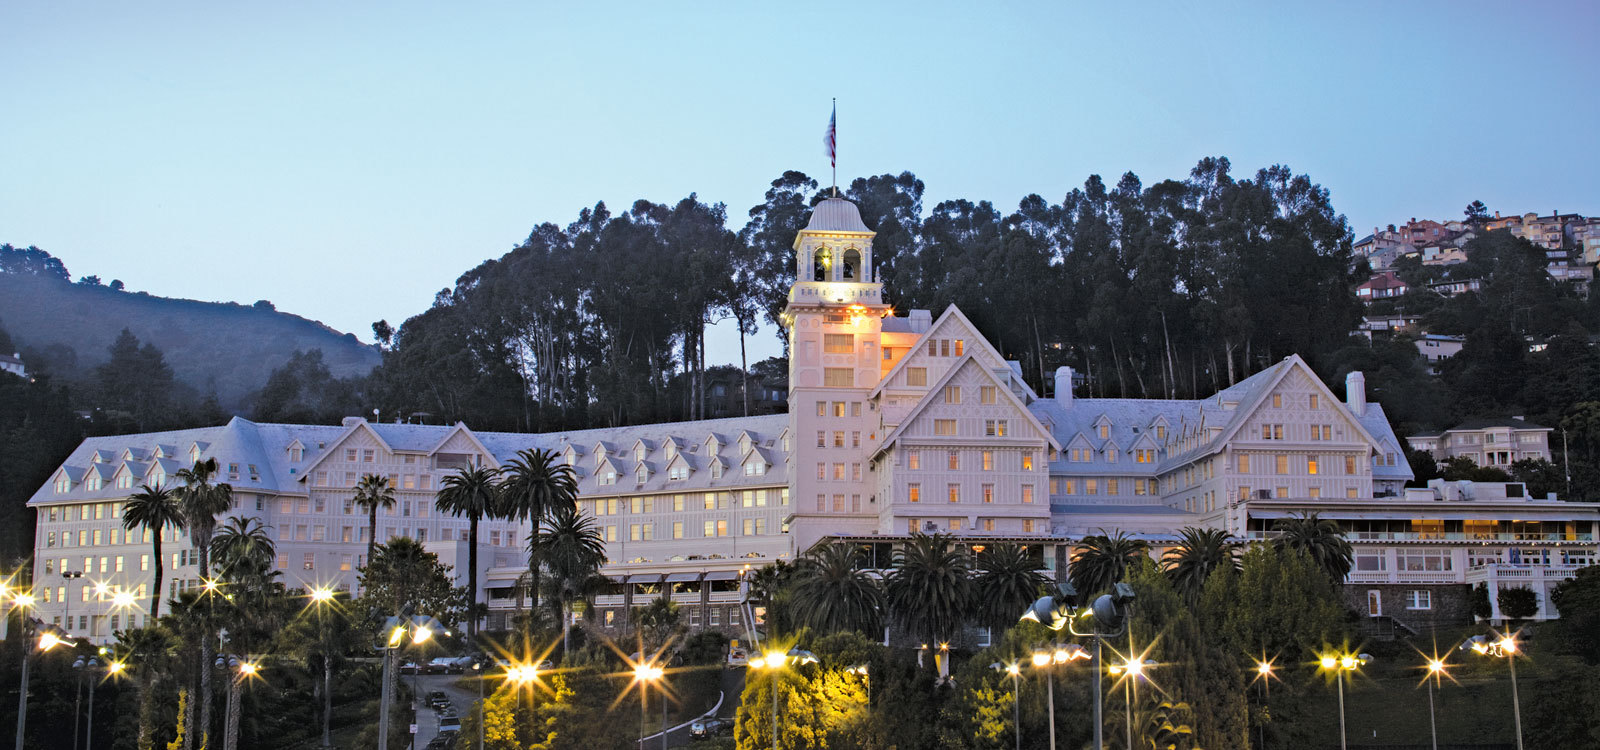 Photo of Claremont Club and Spa, Berkeley, CA